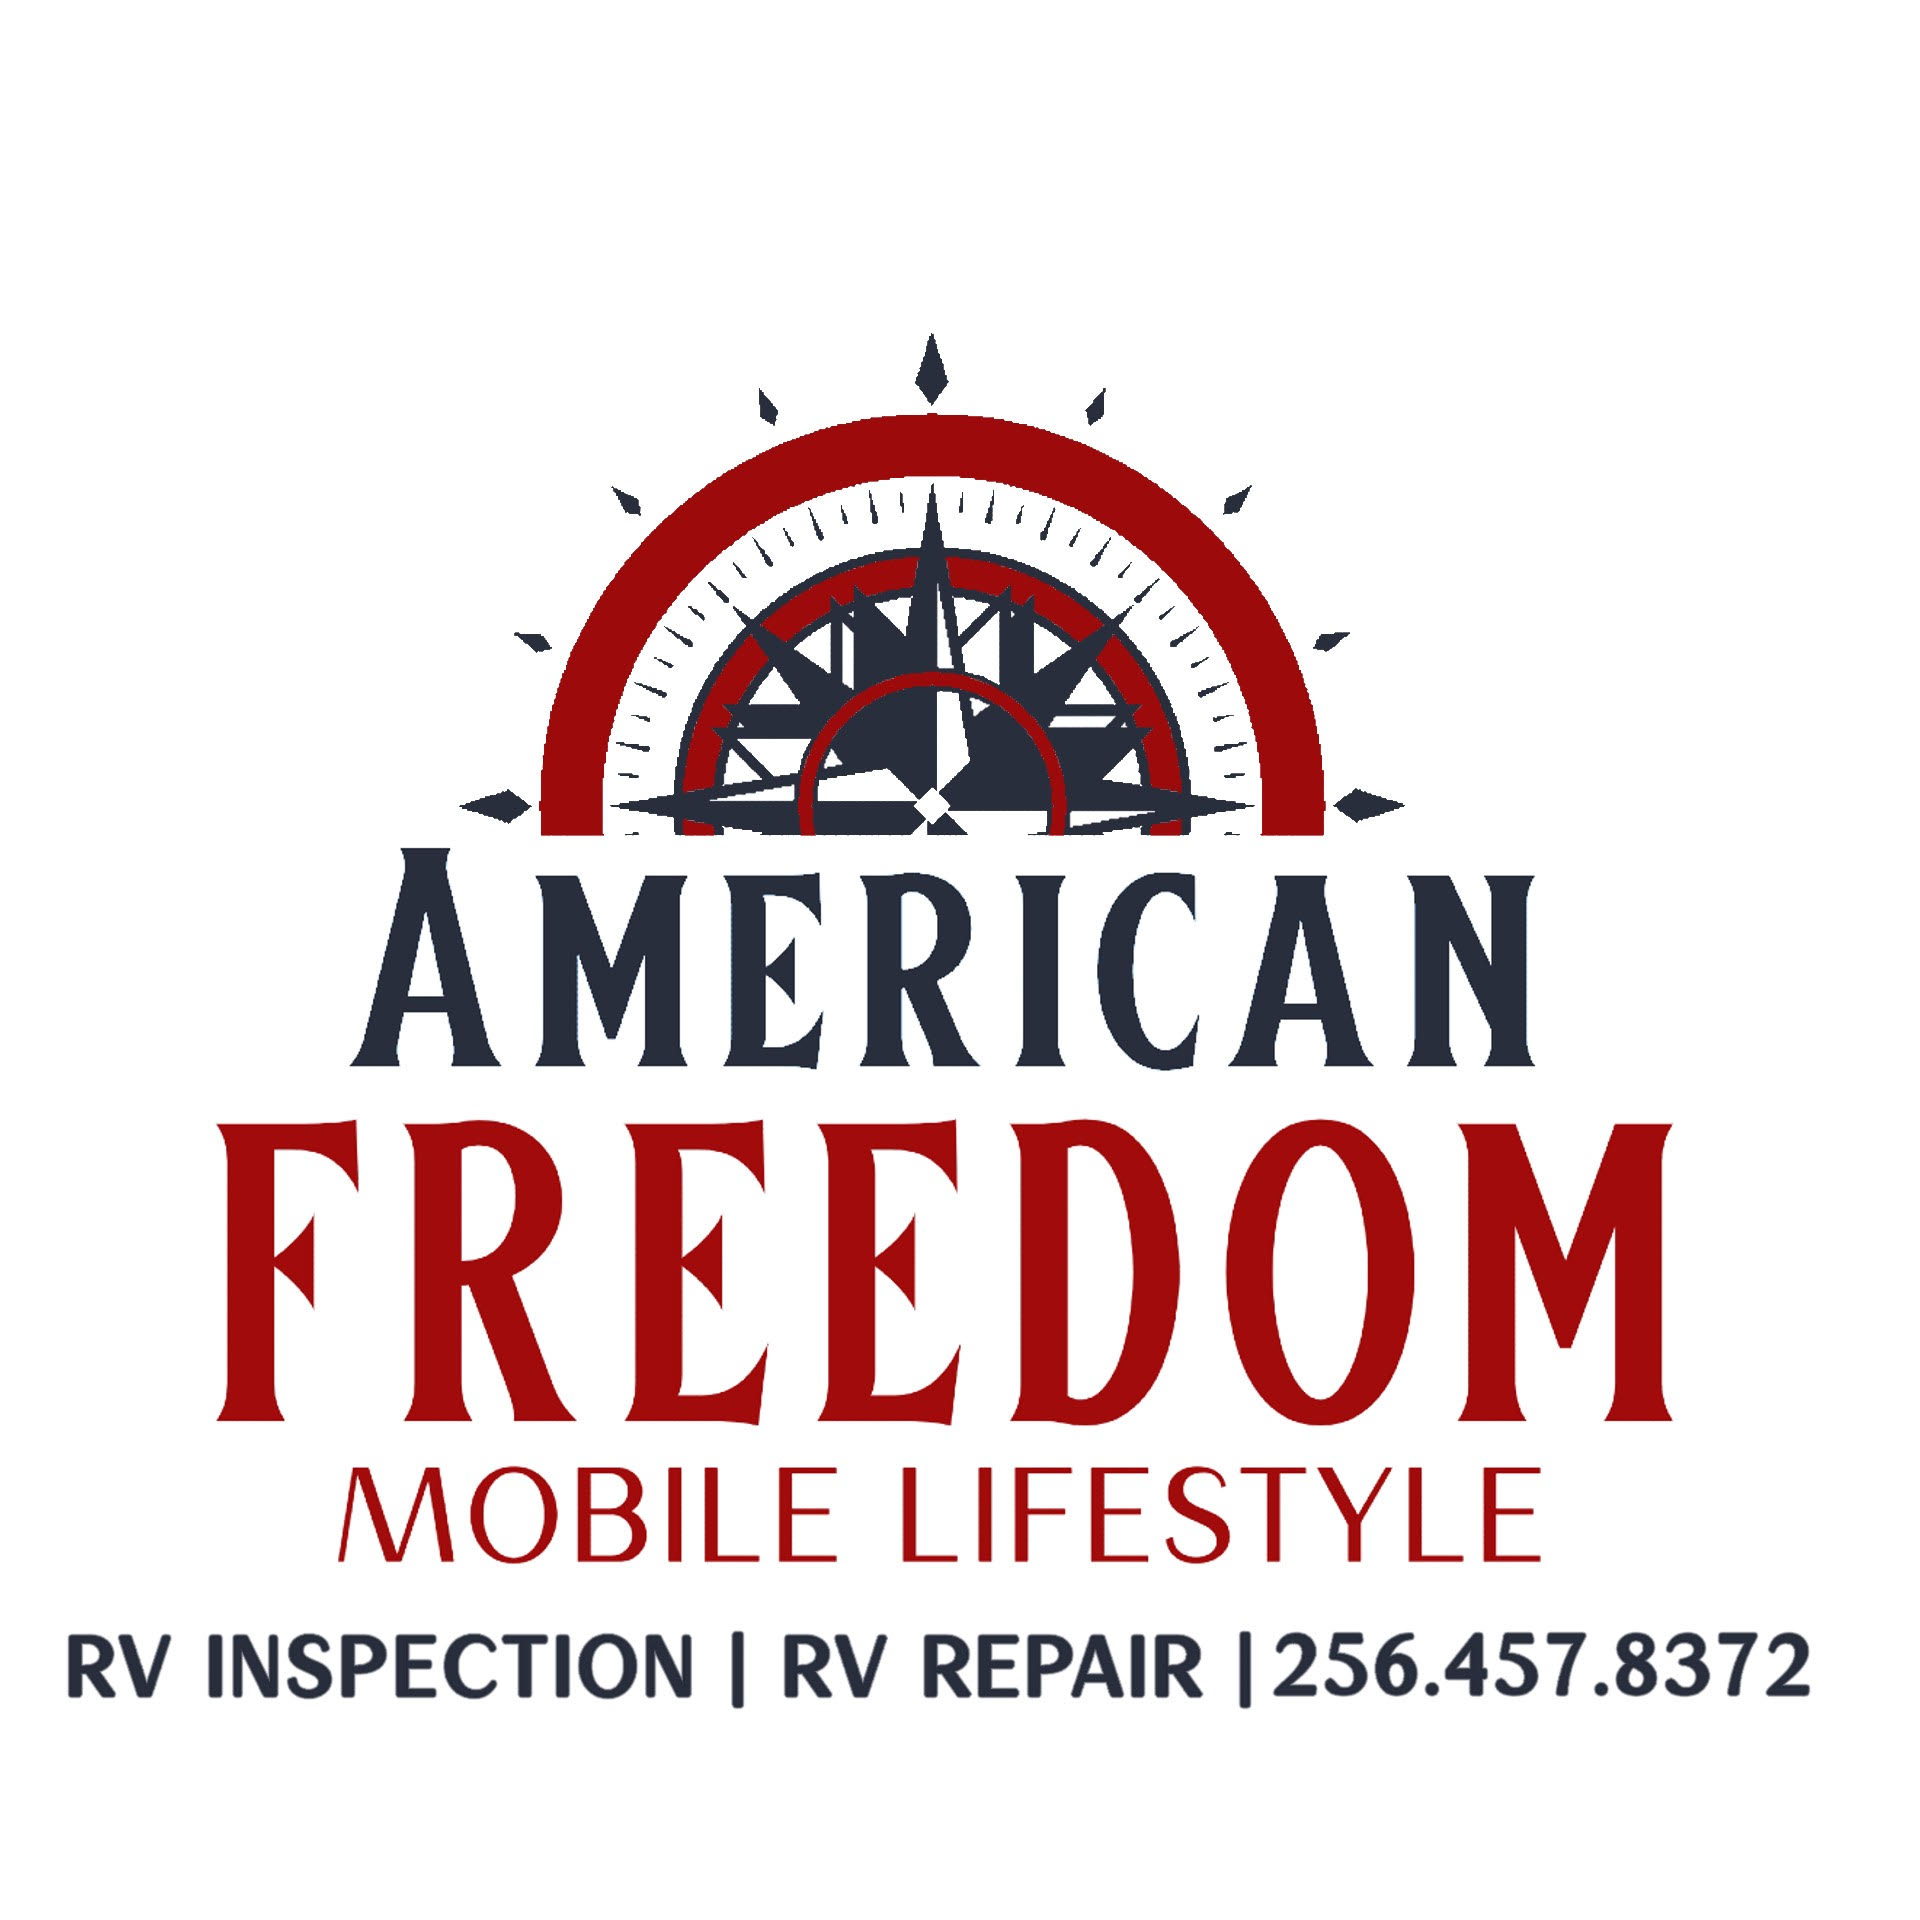 American Freedom Mobile Lifestyle